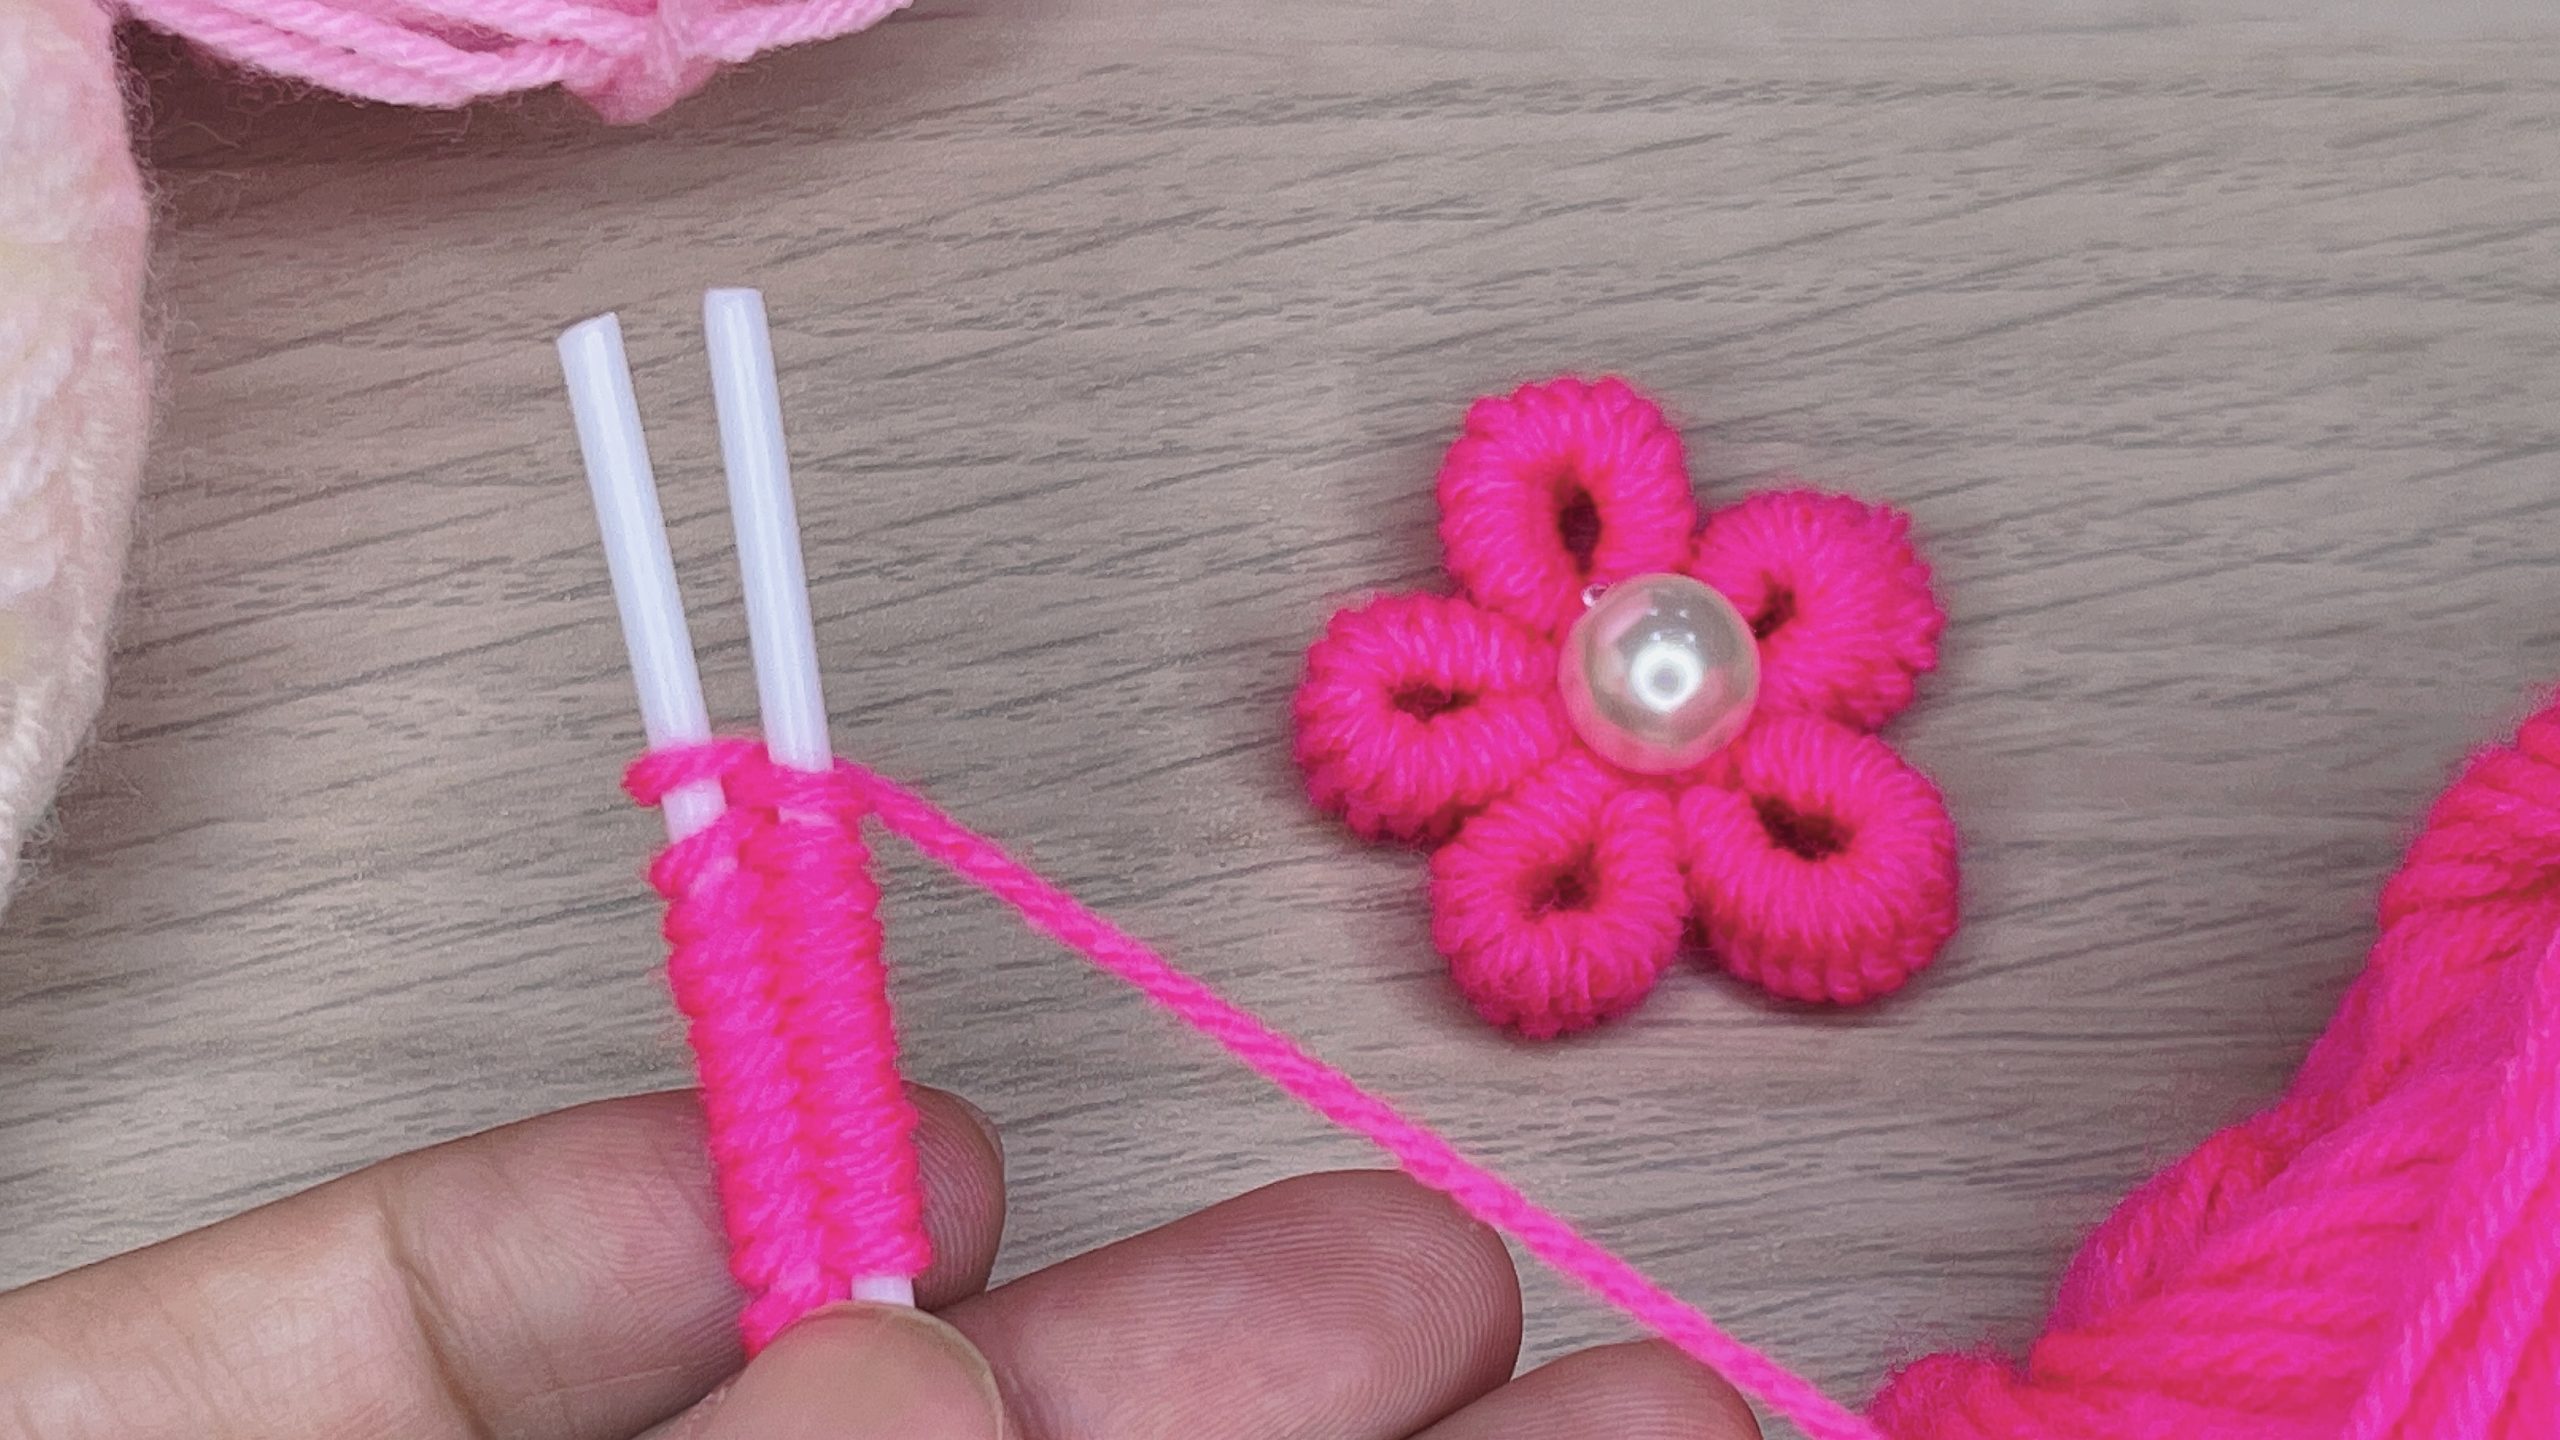 wool flowers made with cotton buds